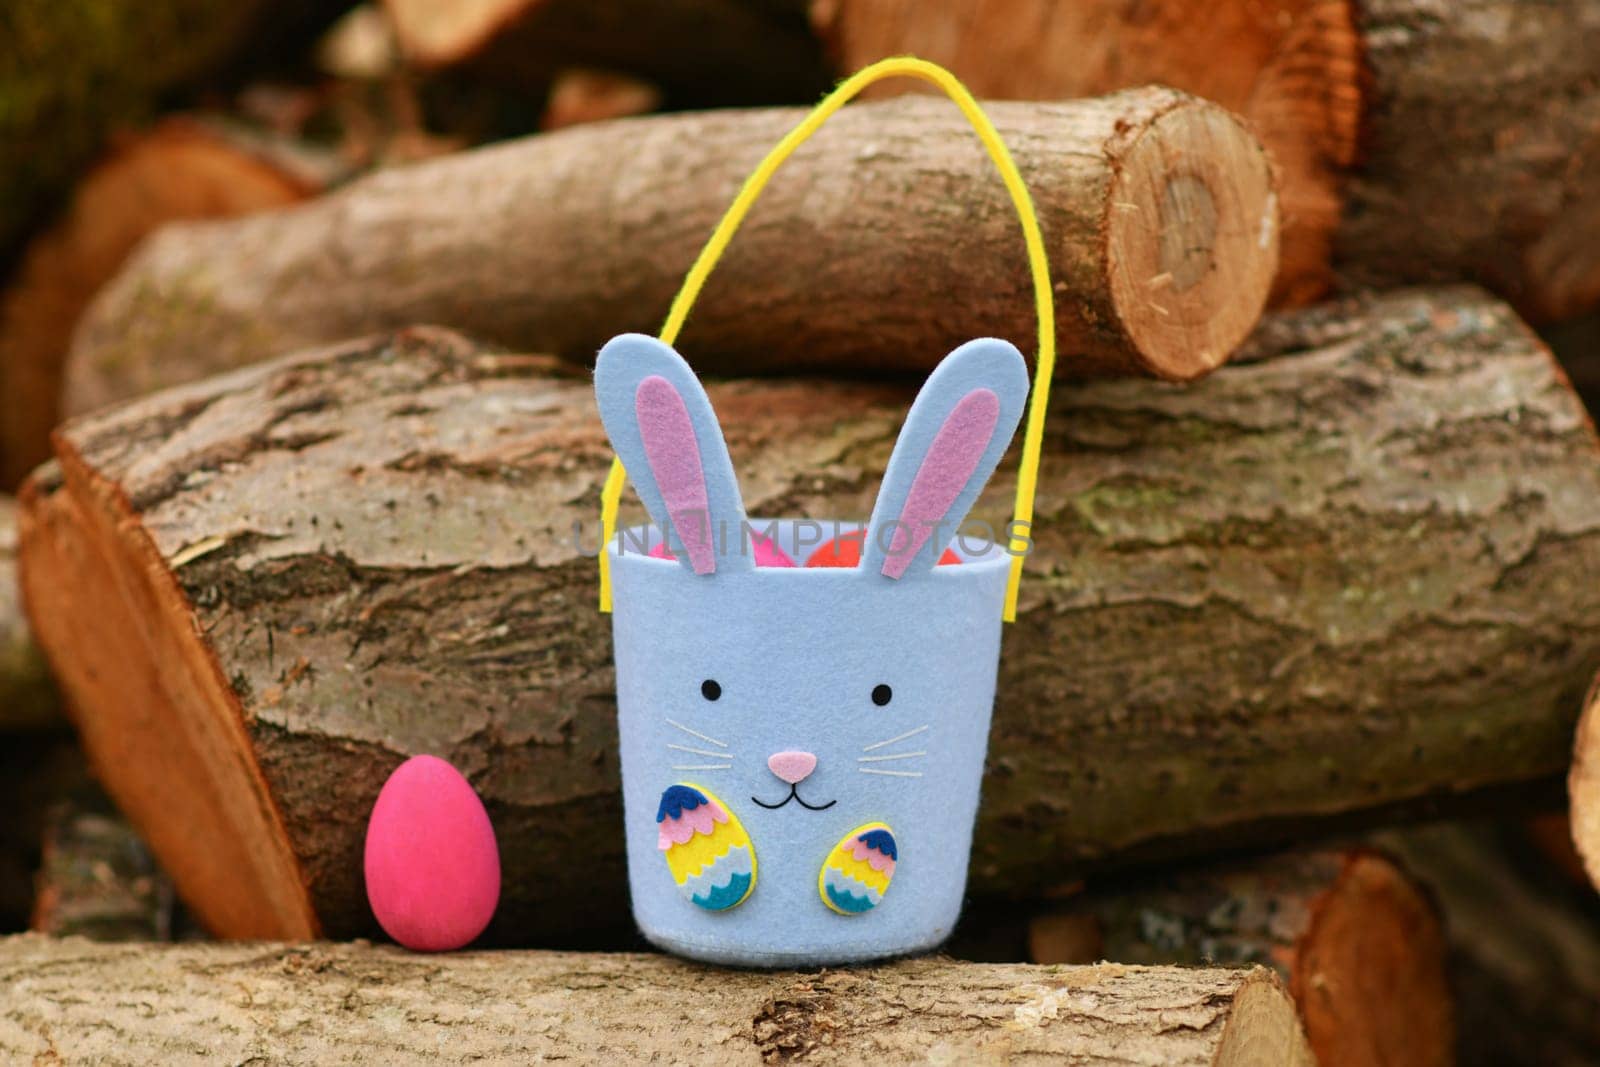 Bunny-shaped bag for finding chocolate eggs for Easter by Godi